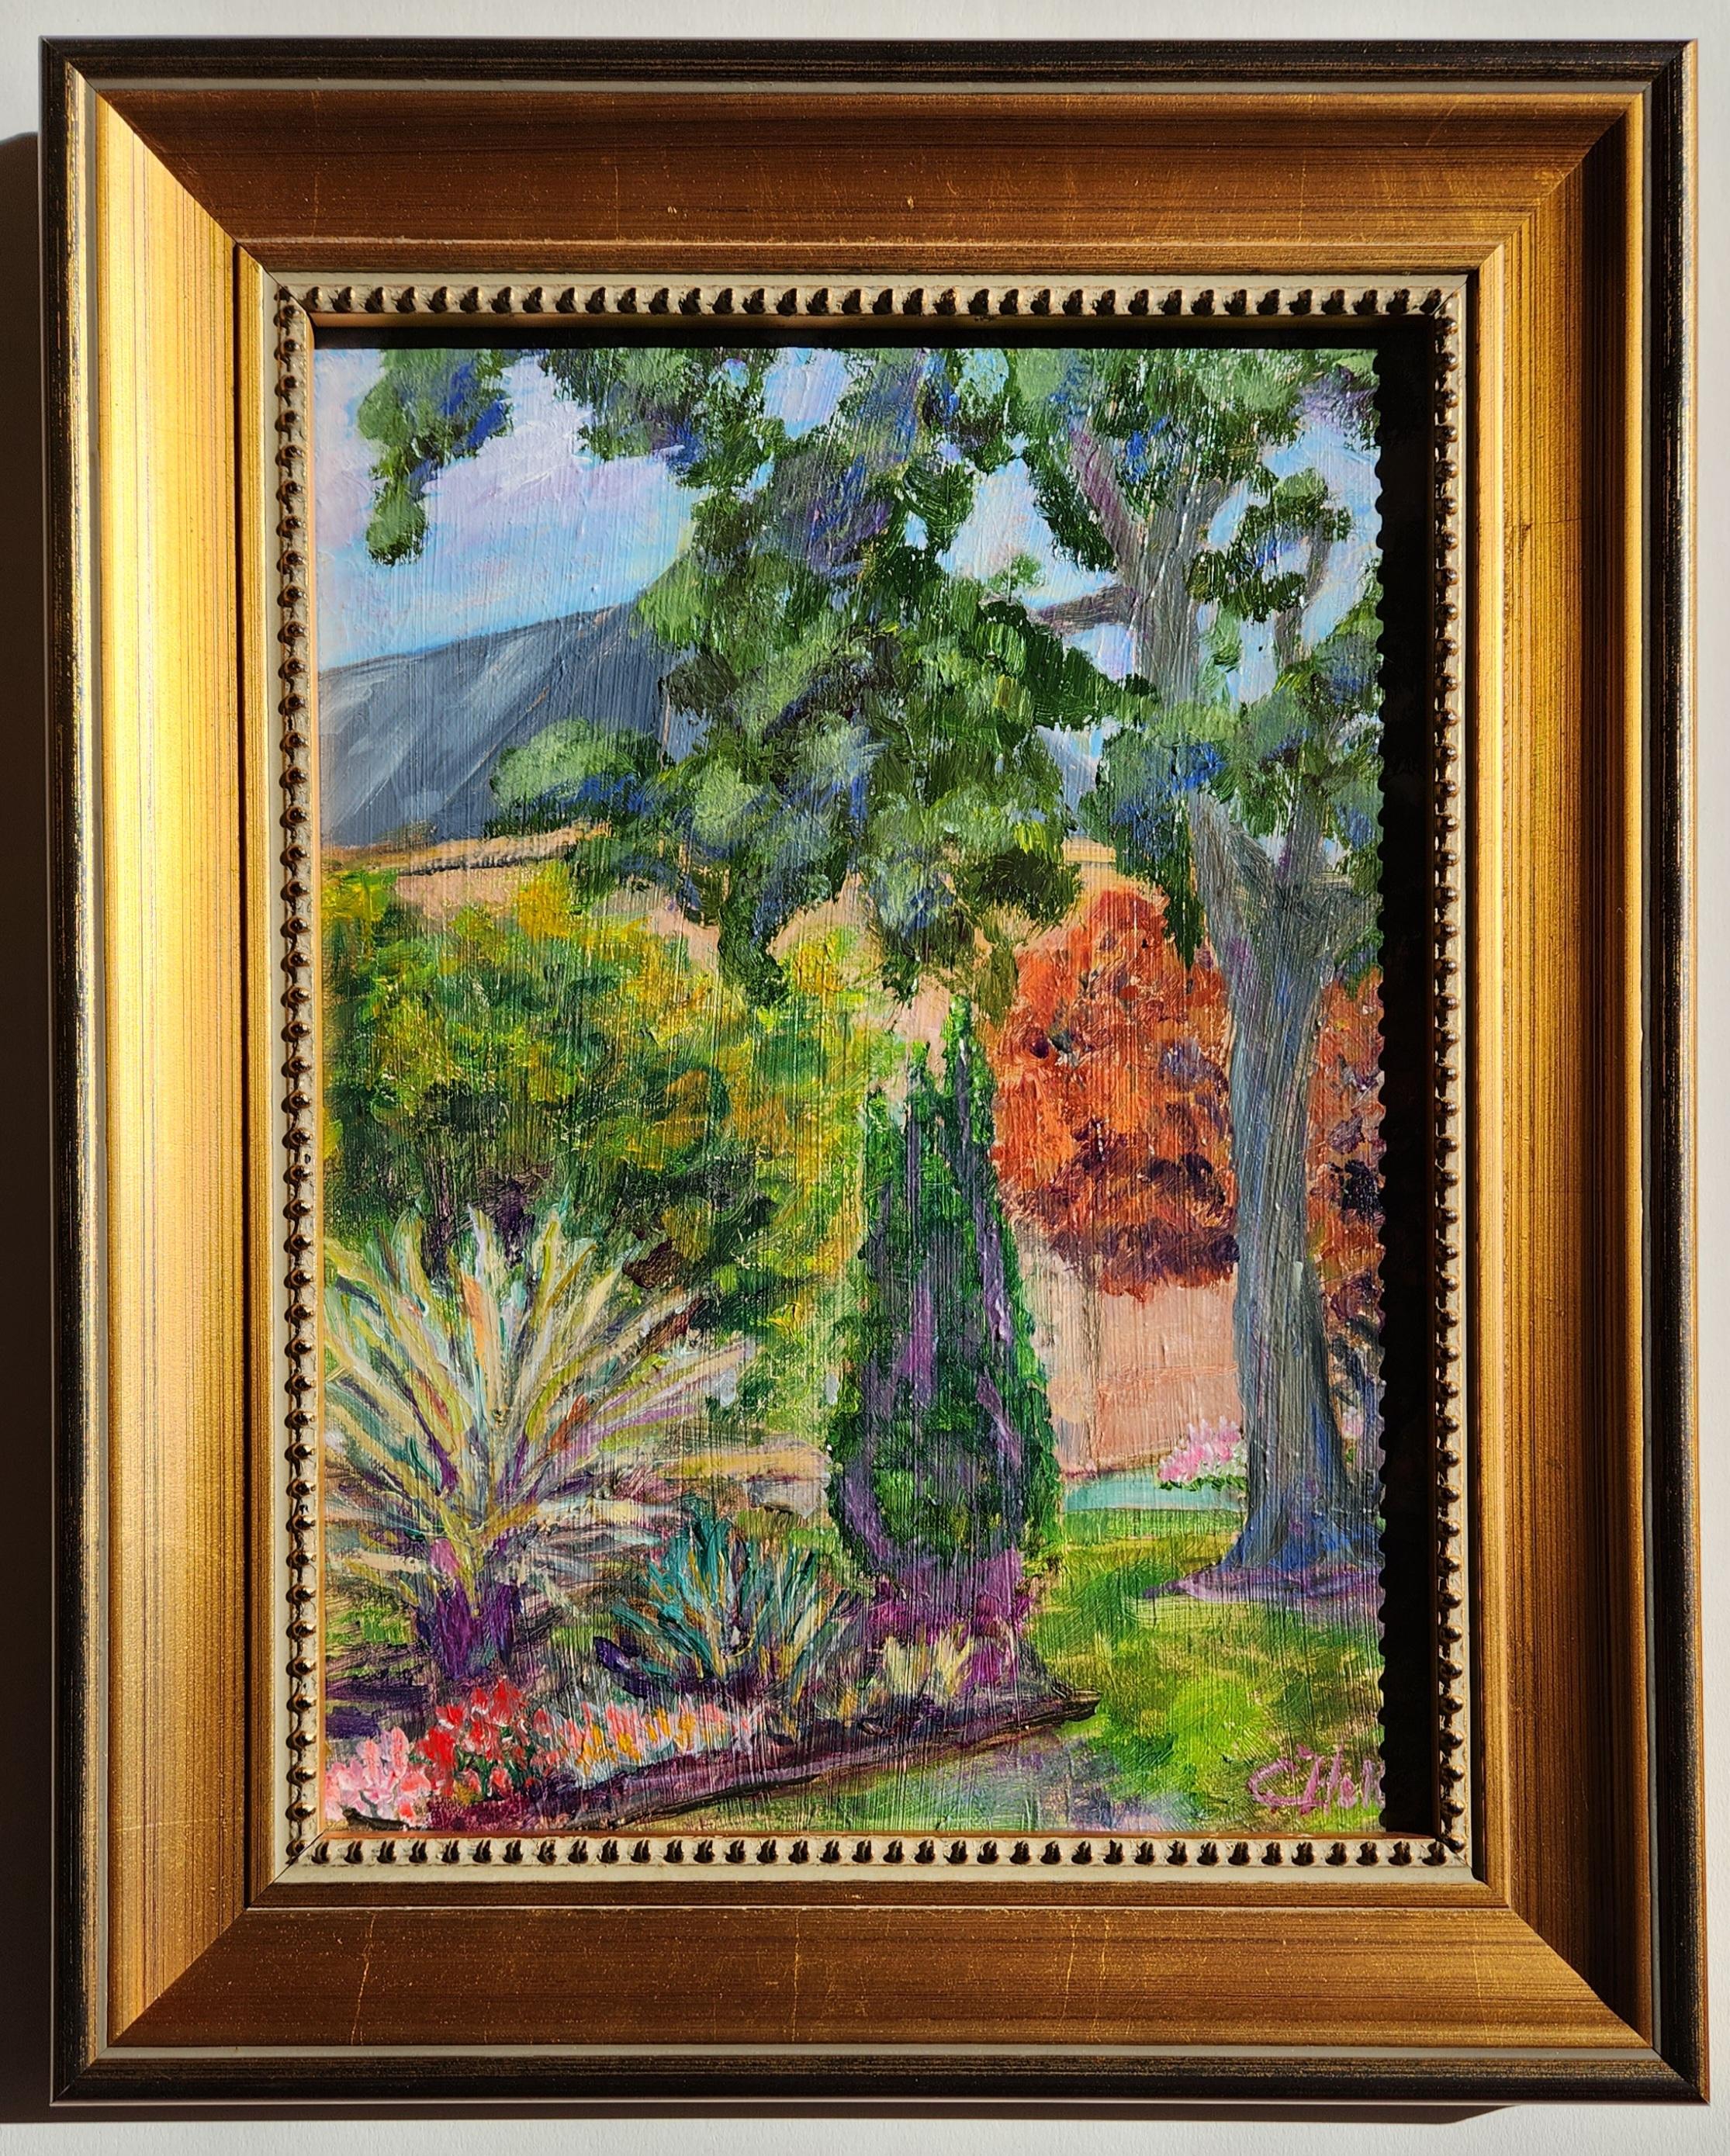 Oil on Canvas Landscape -- City Garden - Painting by Conard Holton